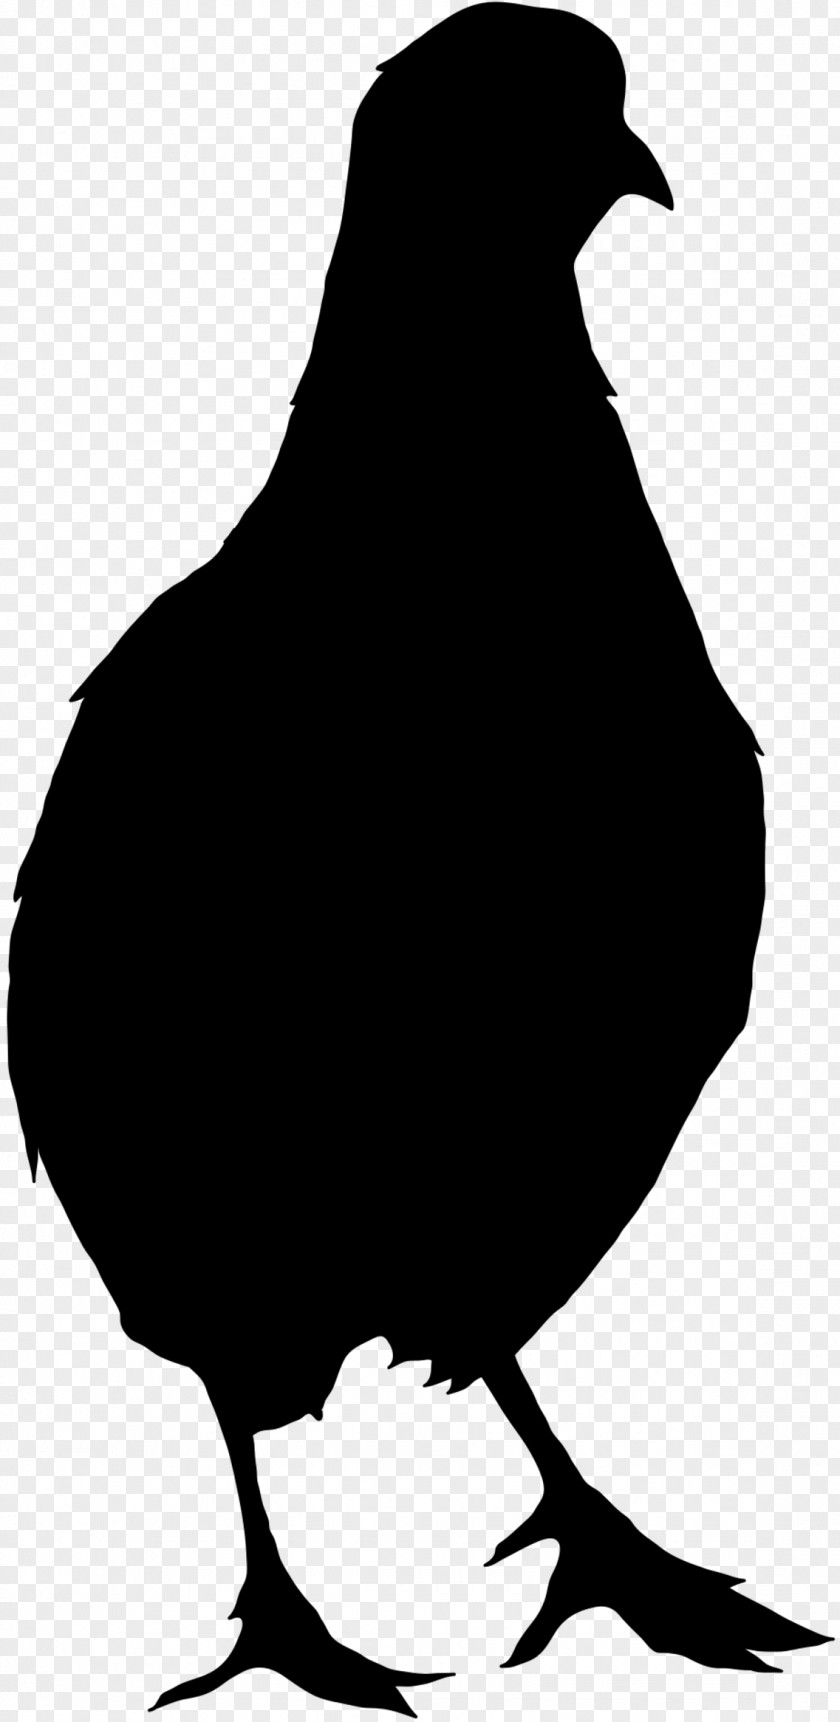 Northern Bobwhite Vector Graphics Chicken Silhouette Quail PNG